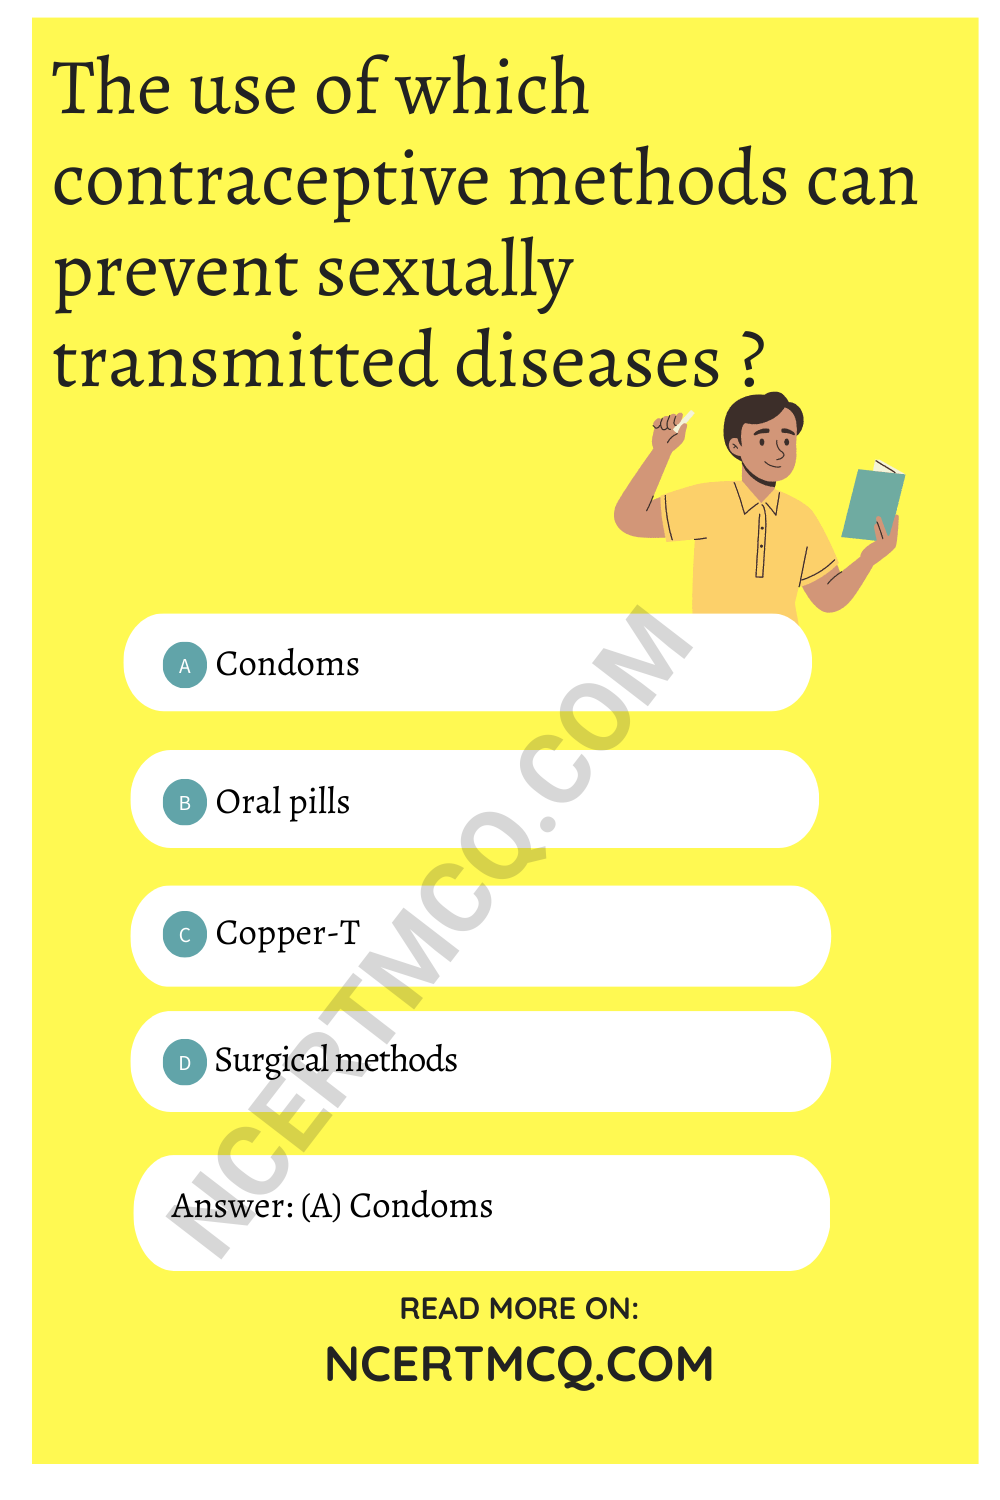 The use of which contraceptive methods can prevent sexually transmitted diseases ?